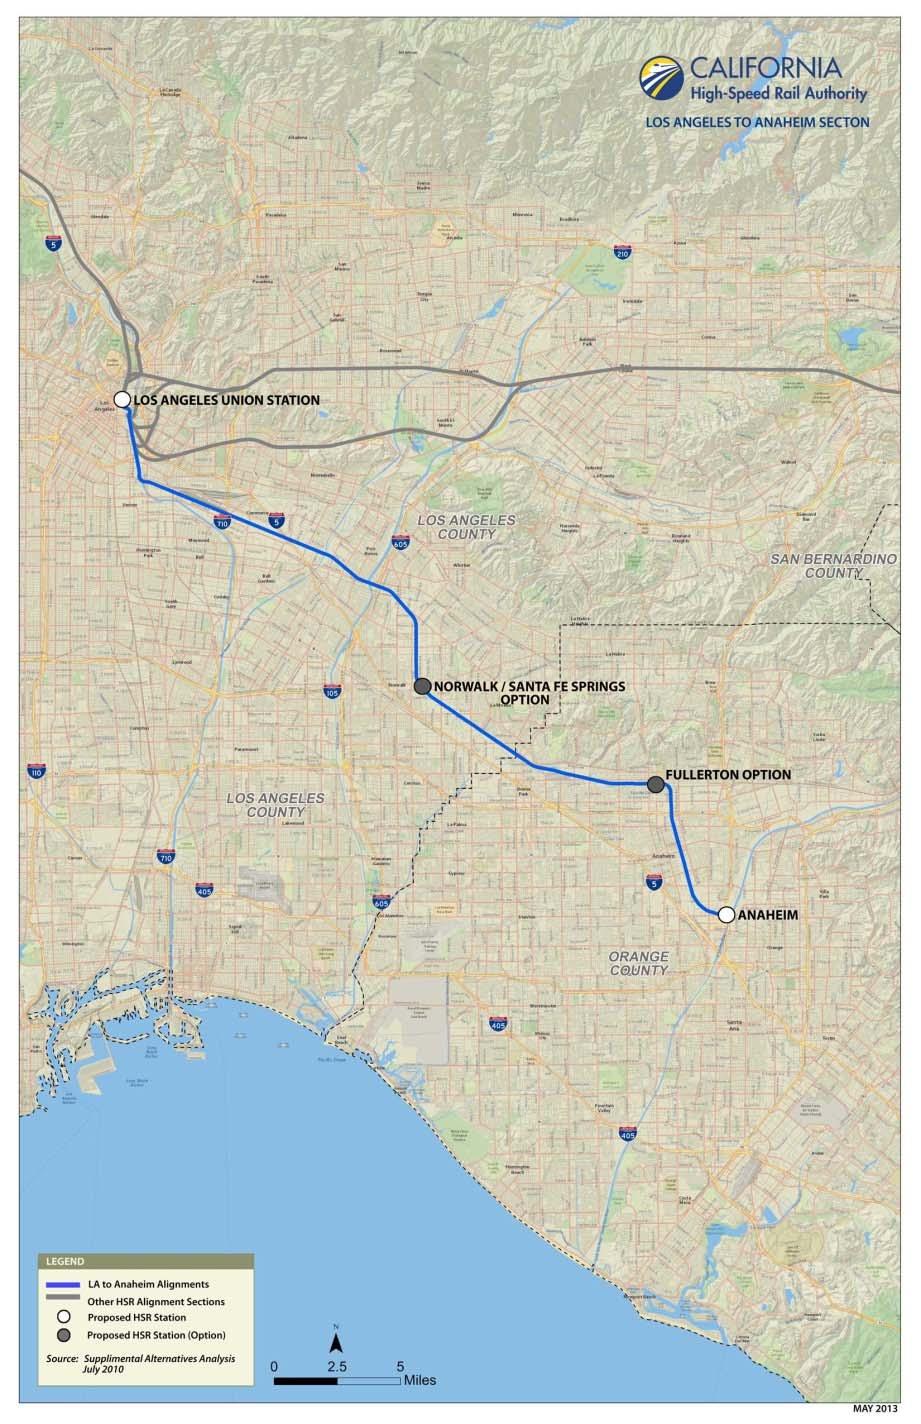 LOS ANGELES TO ANAHEIM PROJECT SECTION 30 Mile Route Connects Los Angeles Union Station and Anaheim Regional Transportation